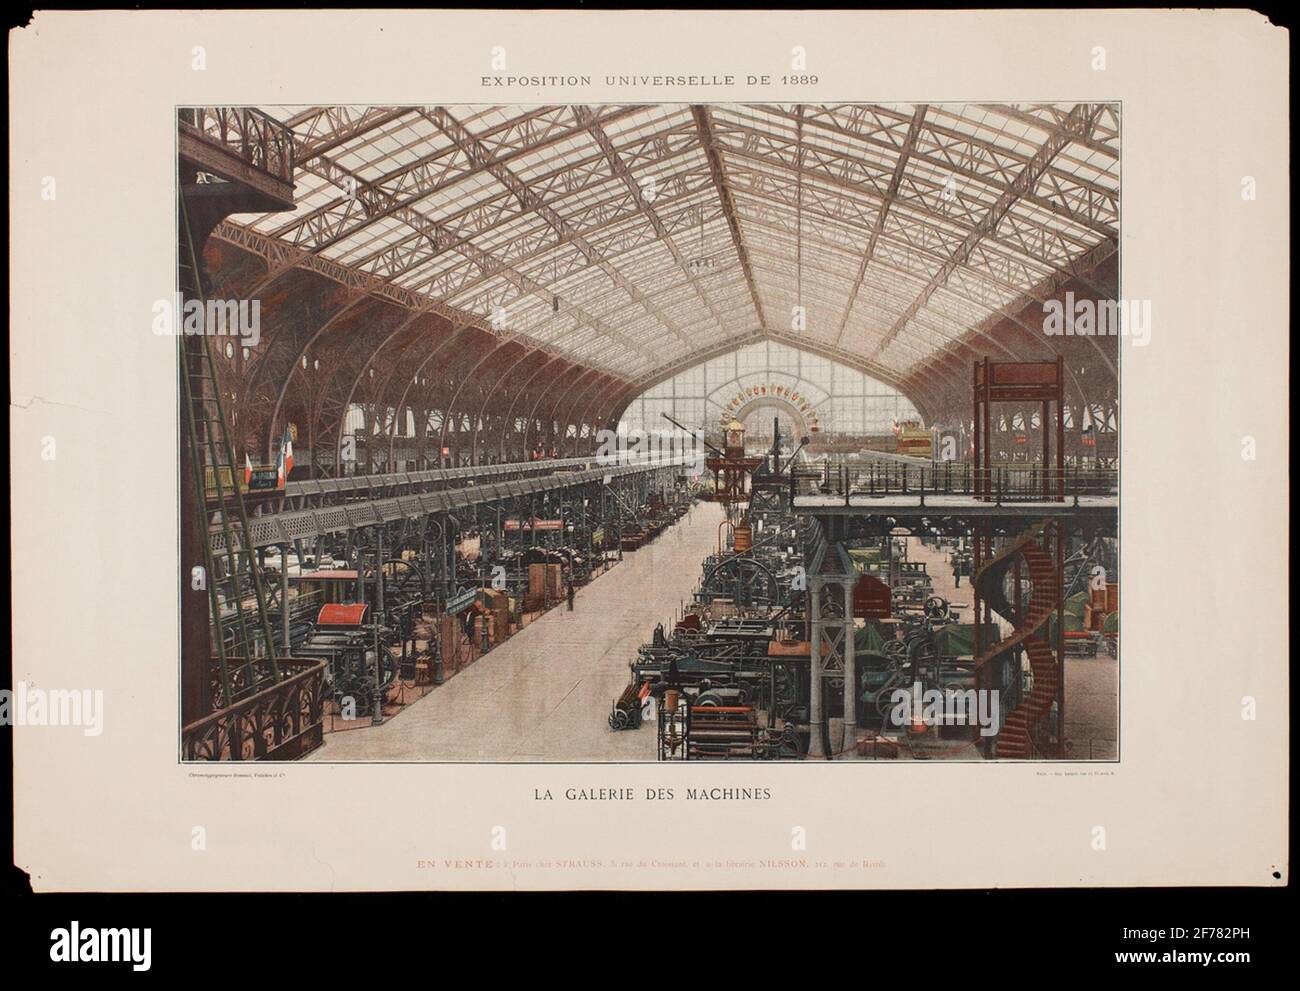 Painting with motifs from the World Expo 1889, Exposition Universal De 1889. View of Machine Hall, Le Galerie des Machines. Stock Photo